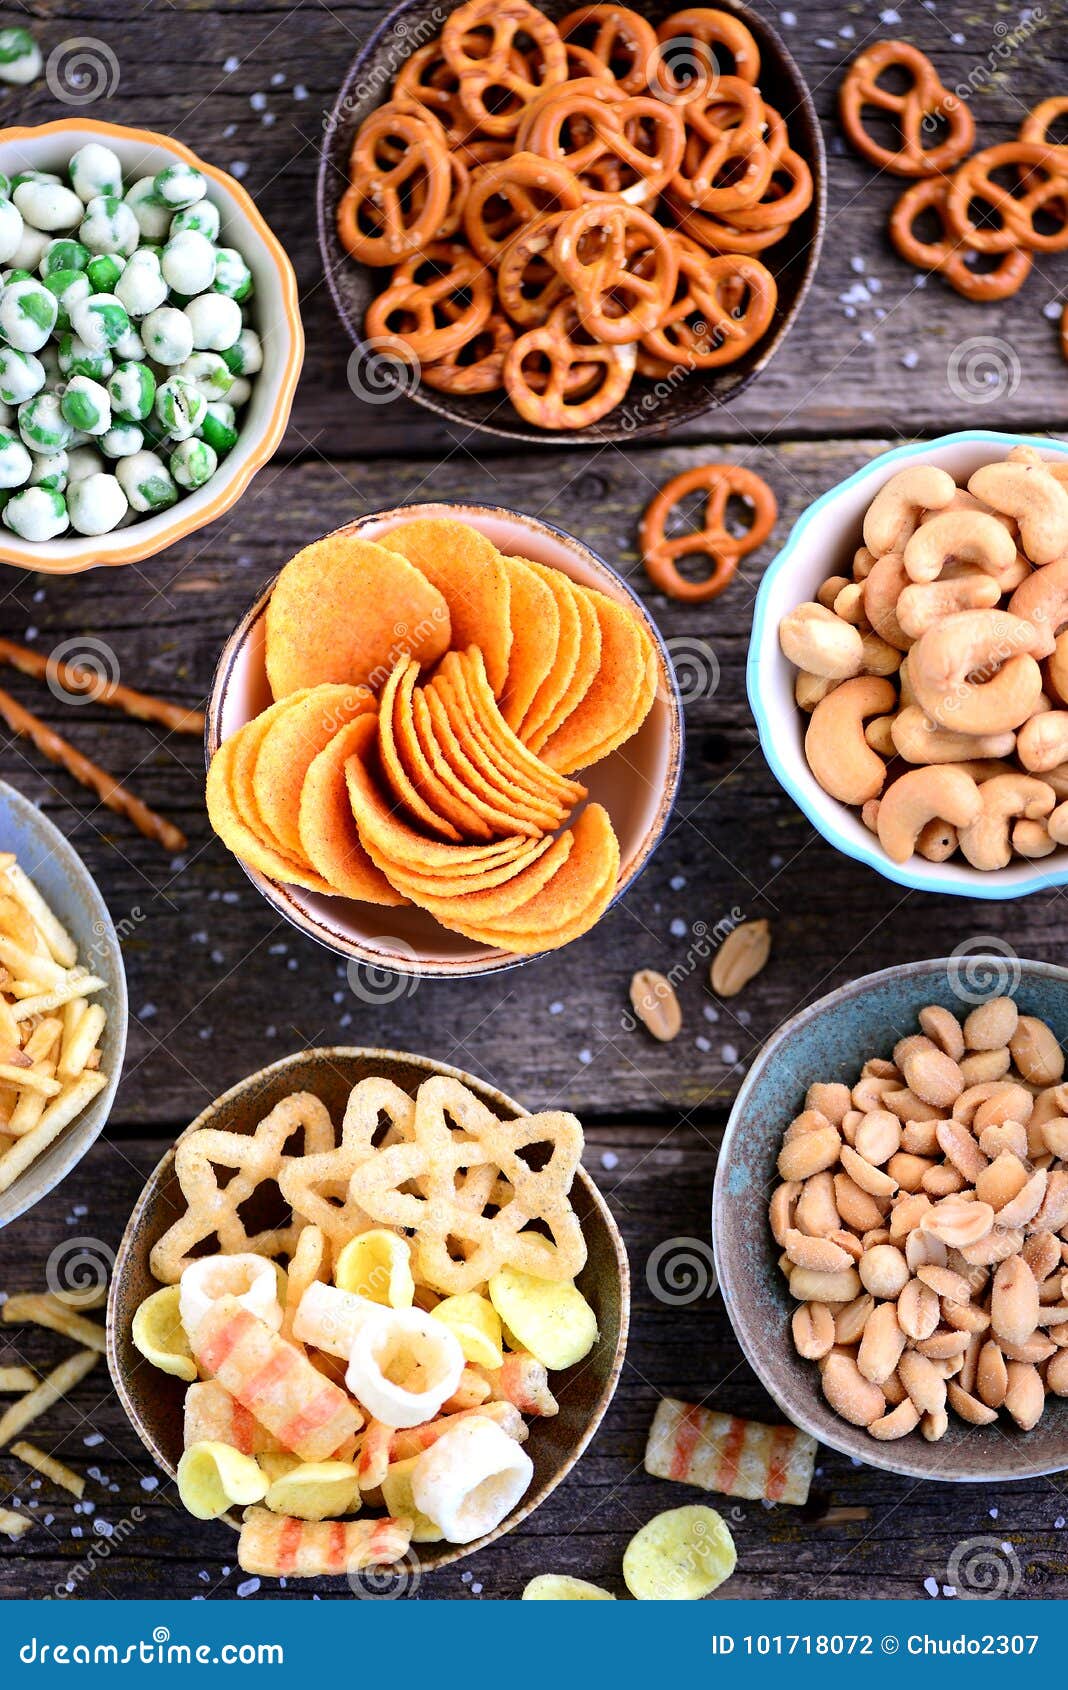 Different Kinds of Snacks - Chips, Salted Peanuts, Cashews, Peas with  Wasabi, Pretzels with Salt, Potatoes, Salted Straw. Stock Photo - Image of  potatoes, stick: 101718072